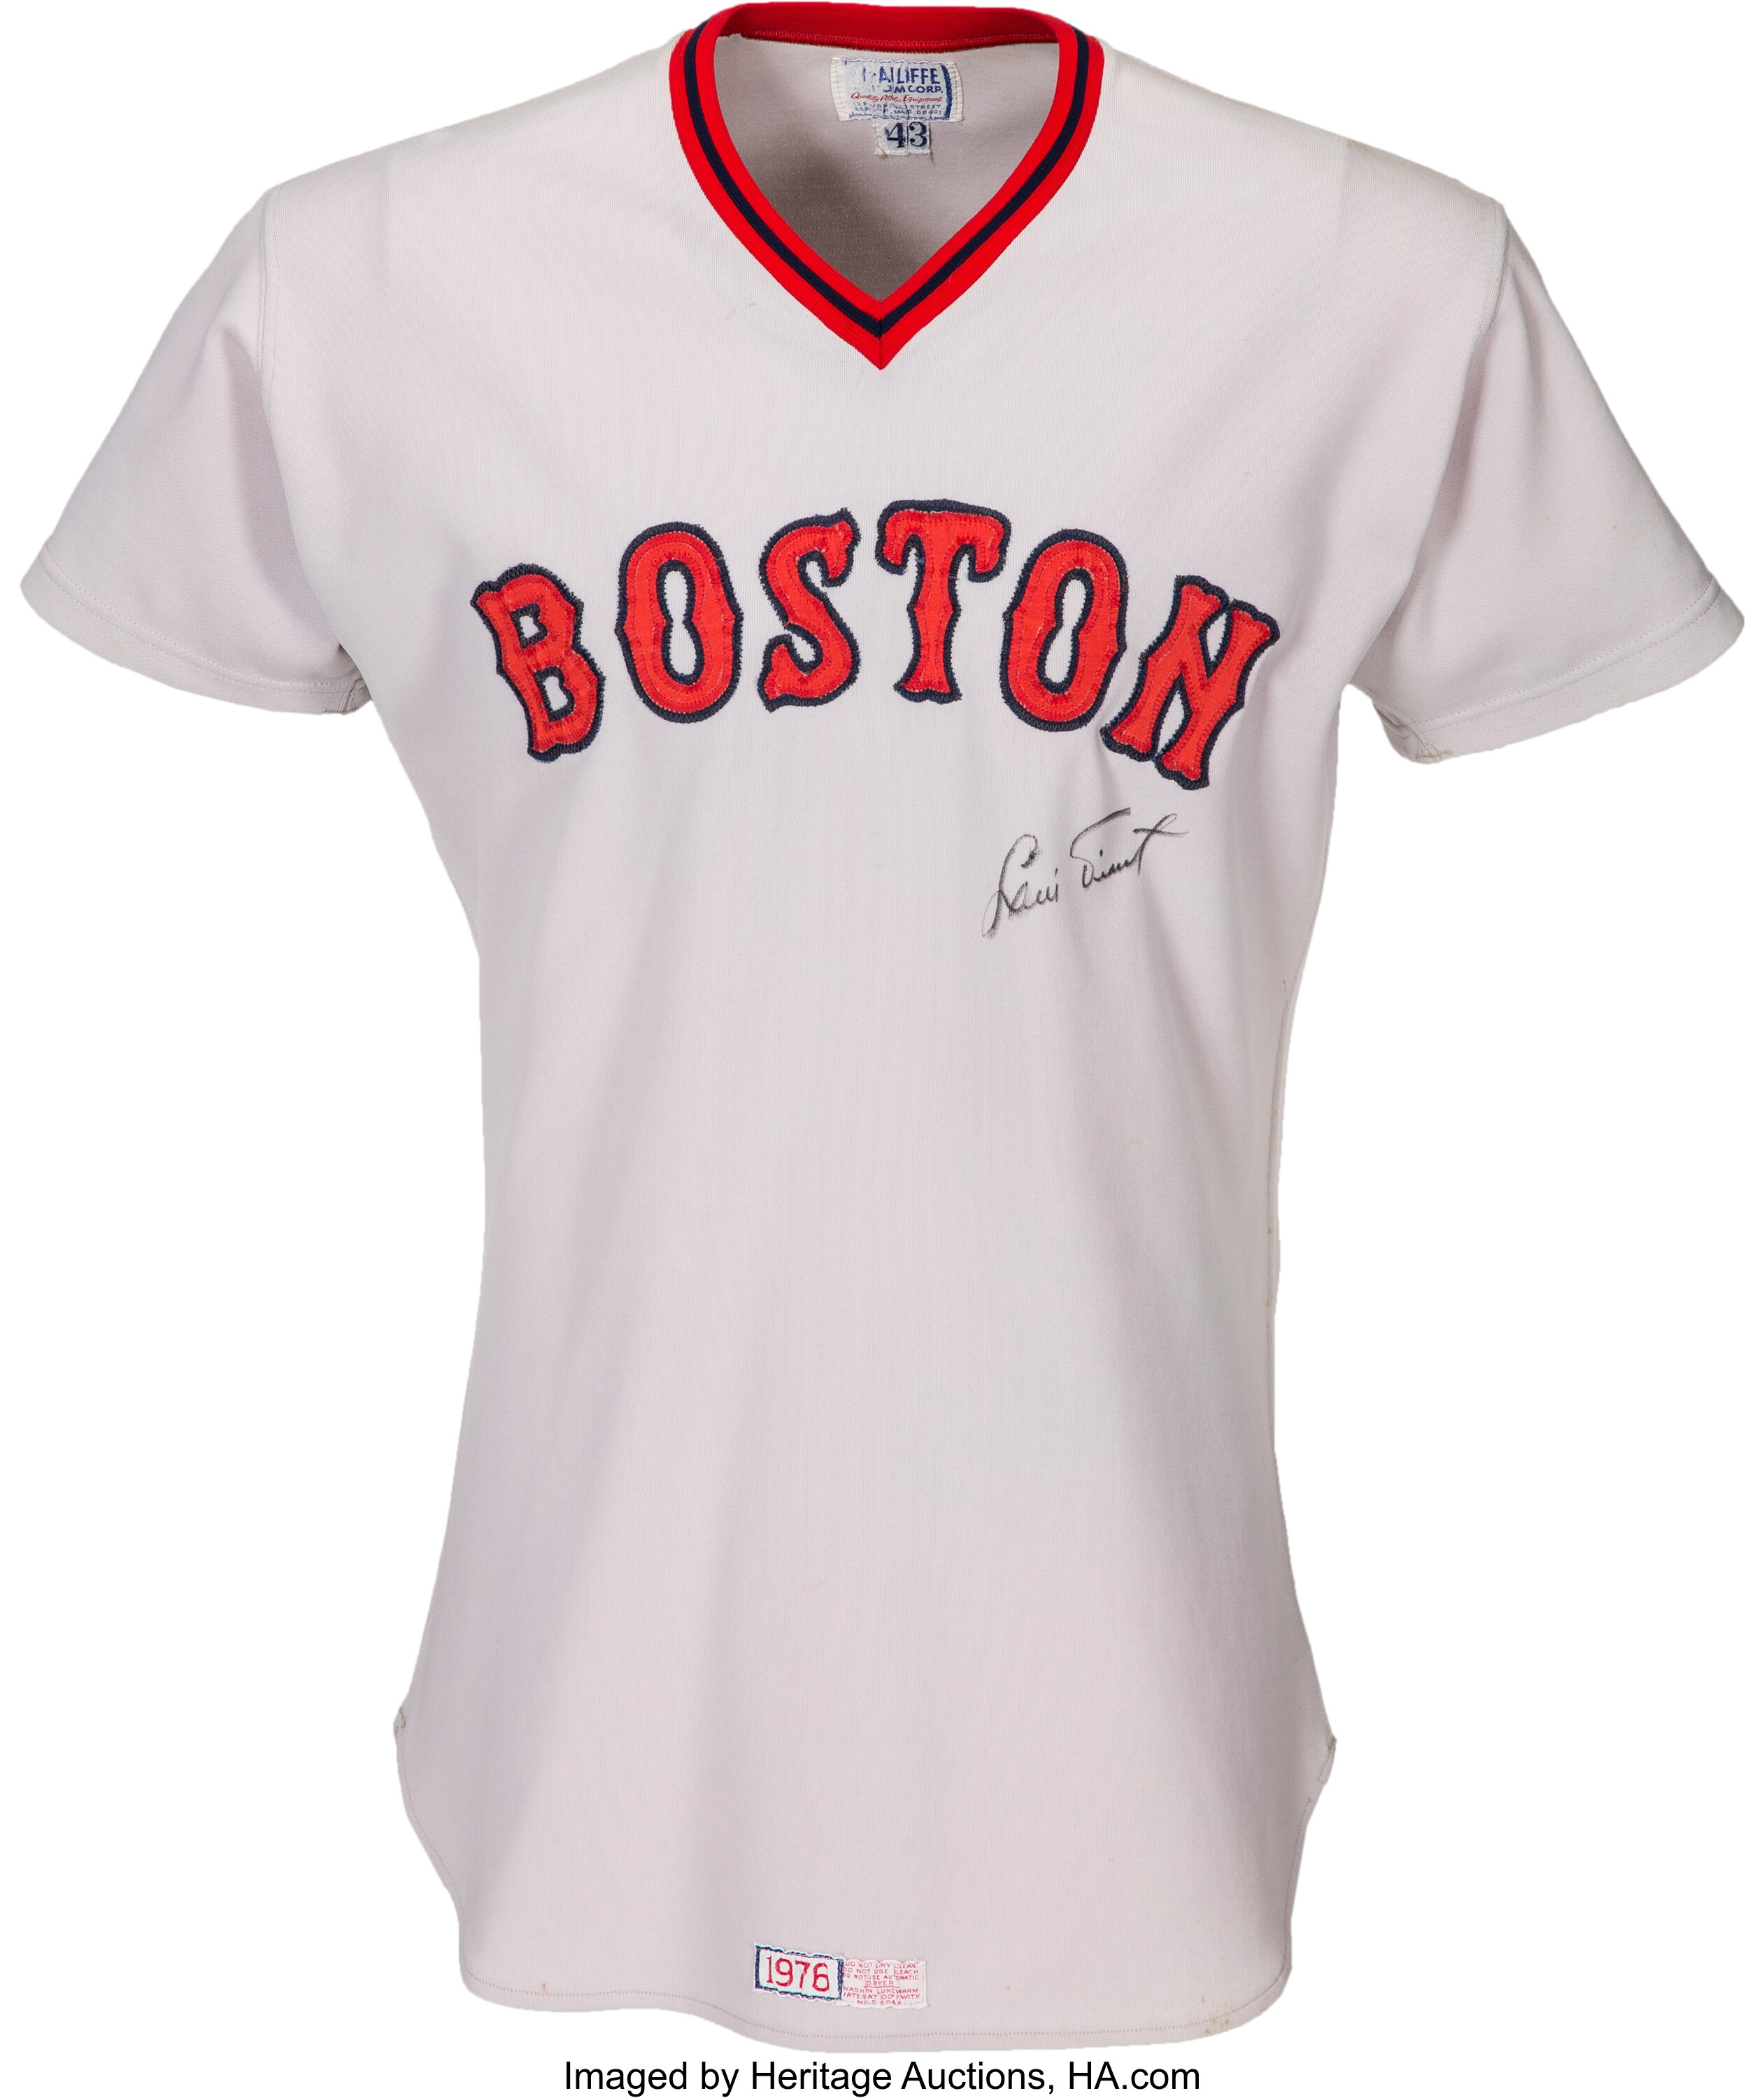 1976 Pawtucket Red Sox Game Worn Uniform. Founded in 1970, the